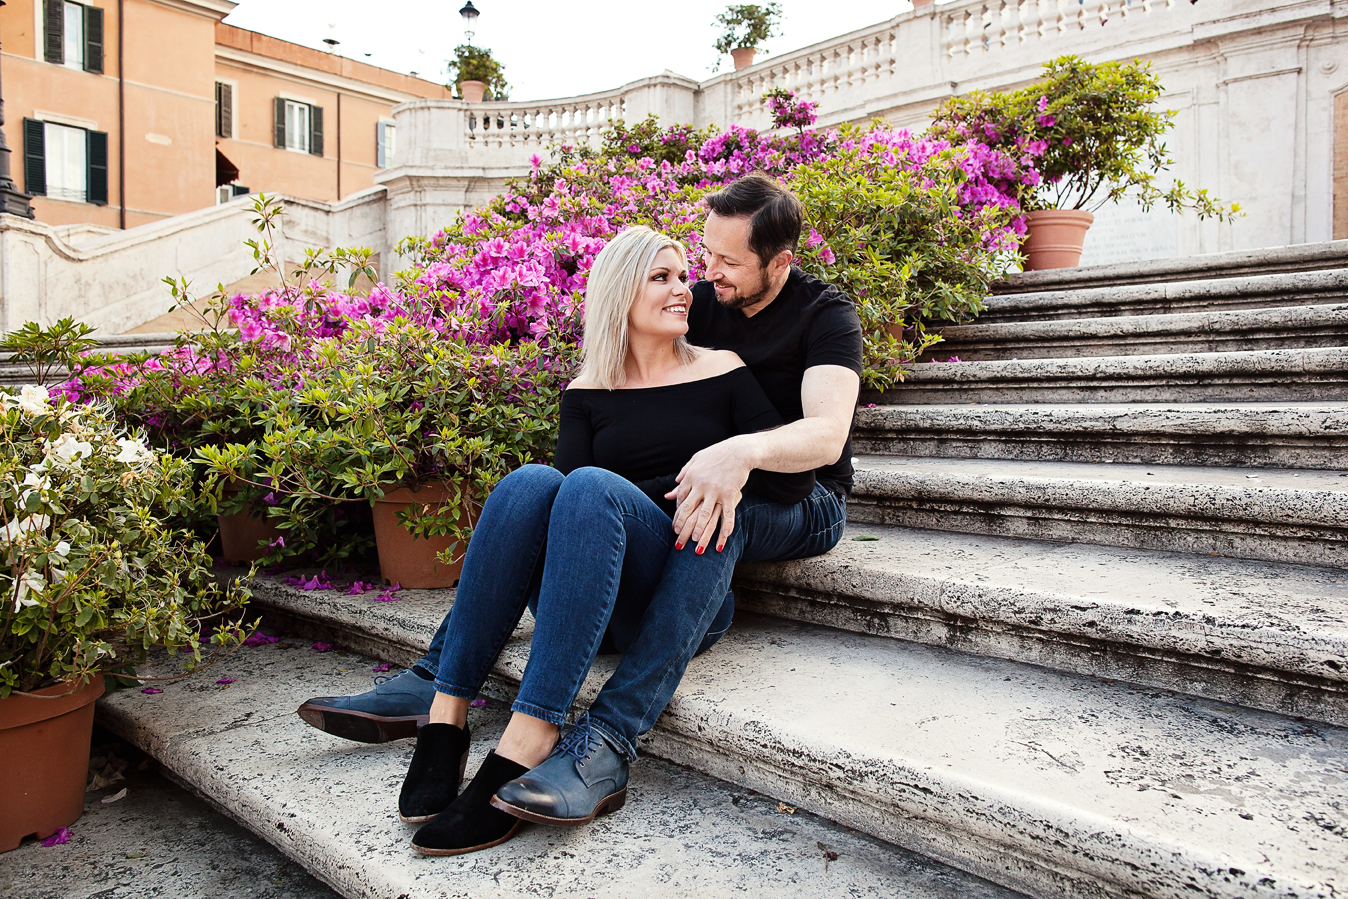 Honeymoon, vacation, family, engagement, maternity, wedding, love story individual and solo photoshoots in Rome, Italy by photographer Tricia Anne Photography | Rome Photographer, vacation, Pantheon, Colosseum, Spanish Steps, Trevi Fountain, love story, photo shoot in rome, Rome Vacation Photographer, Rome engagement photo shoot, rome honeymoon, rome wedding, elopement in Rome, honeymoon photographer rome, engagement photo shoot, English speaking photographer in Rome